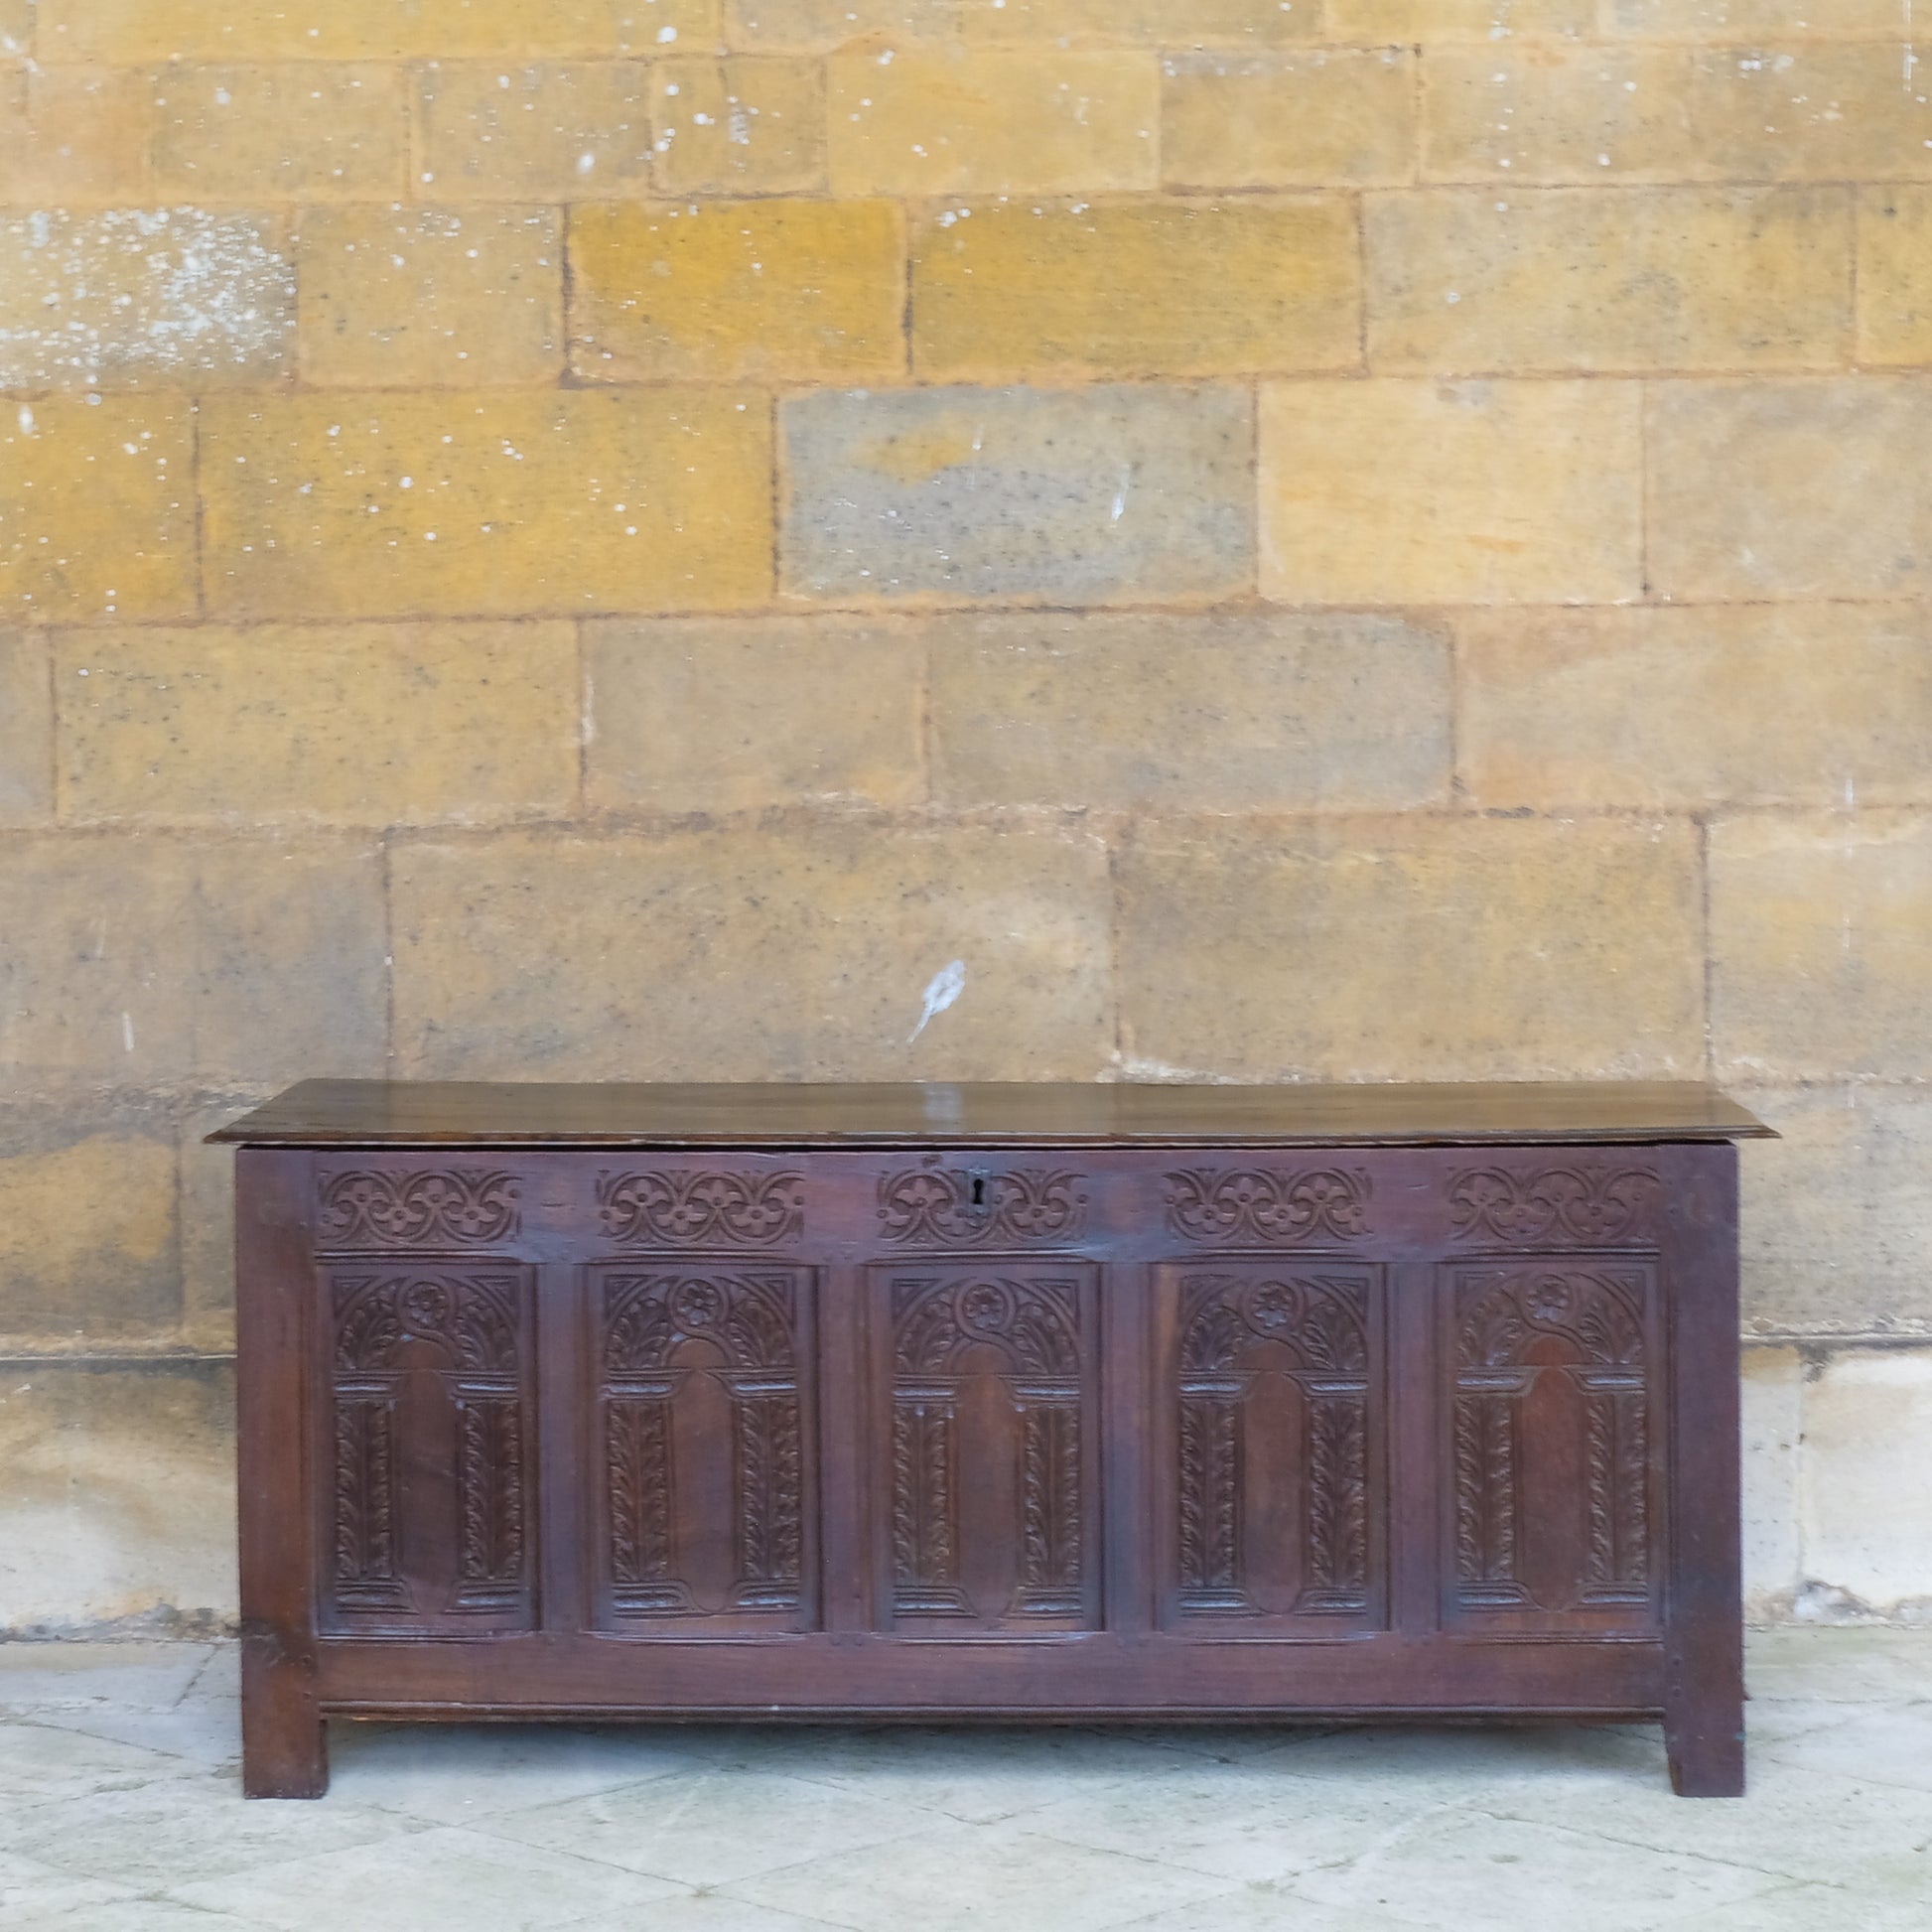 A large 17th century oak coffer with a beautiful five panelled front with stiff leaf carved arcade under a floral top, the moulded rectangular top with the original blacksmith ring hinges. In very good, sturdy condition with a rich patina. Sensitively restored by Anthony Beech, with reclaimed period boards in the base and the top recoloured and waxed. It would be a beautiful storage solution for blankets, toys or a croquet set.